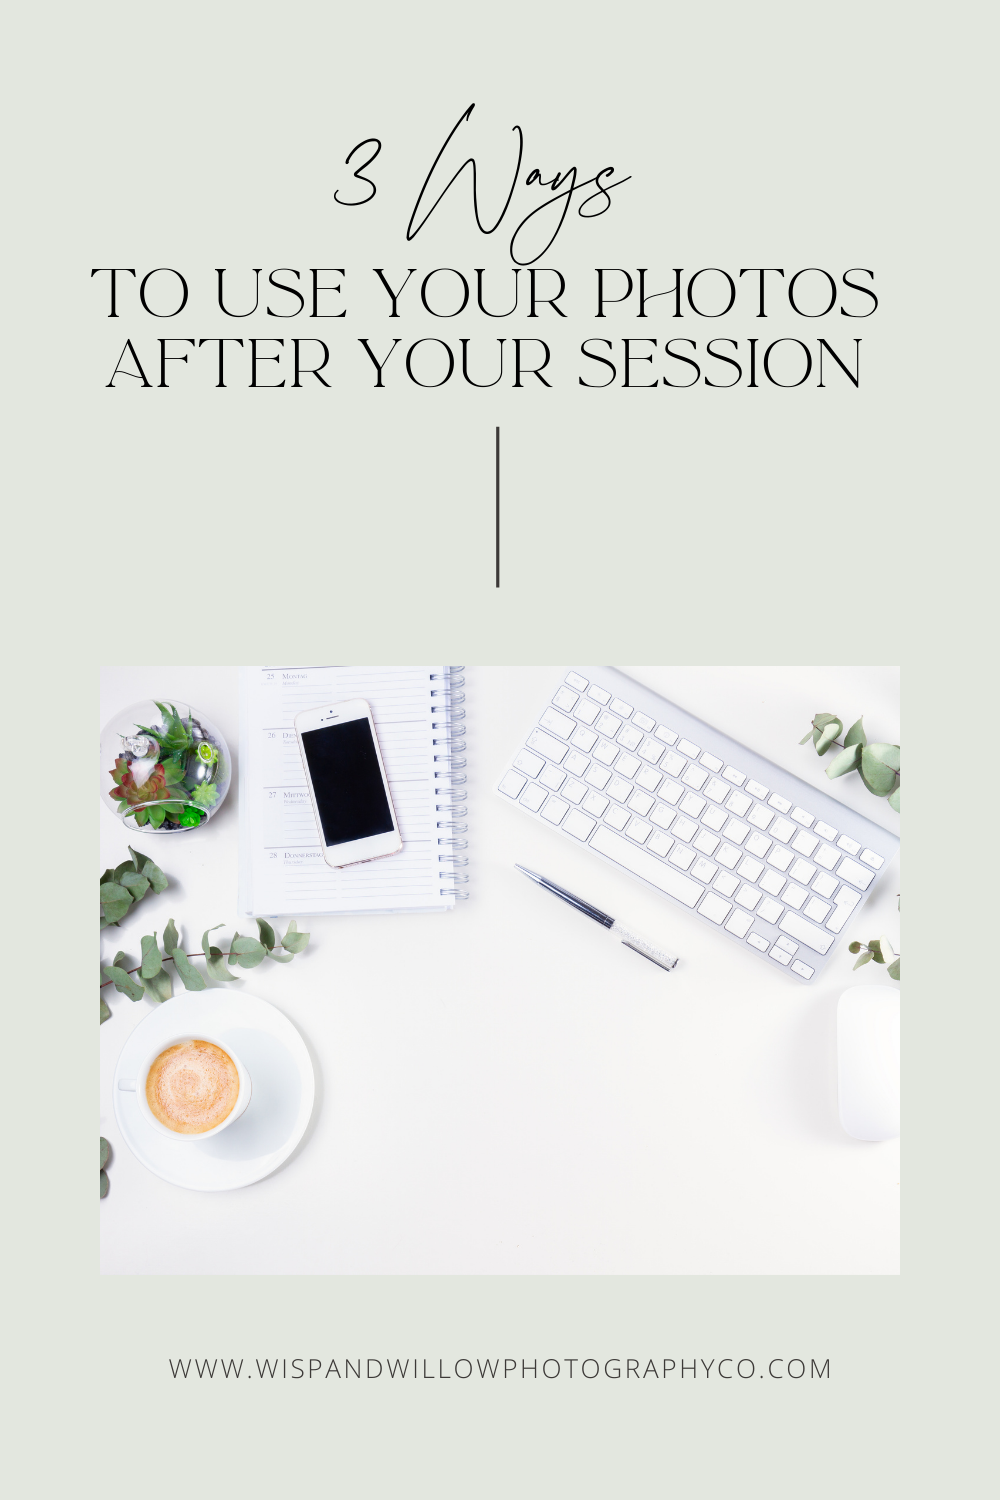 There are so many ways to use your photos after your session! Click here to read more about how we suggest you use them to help keep those moments close to you!